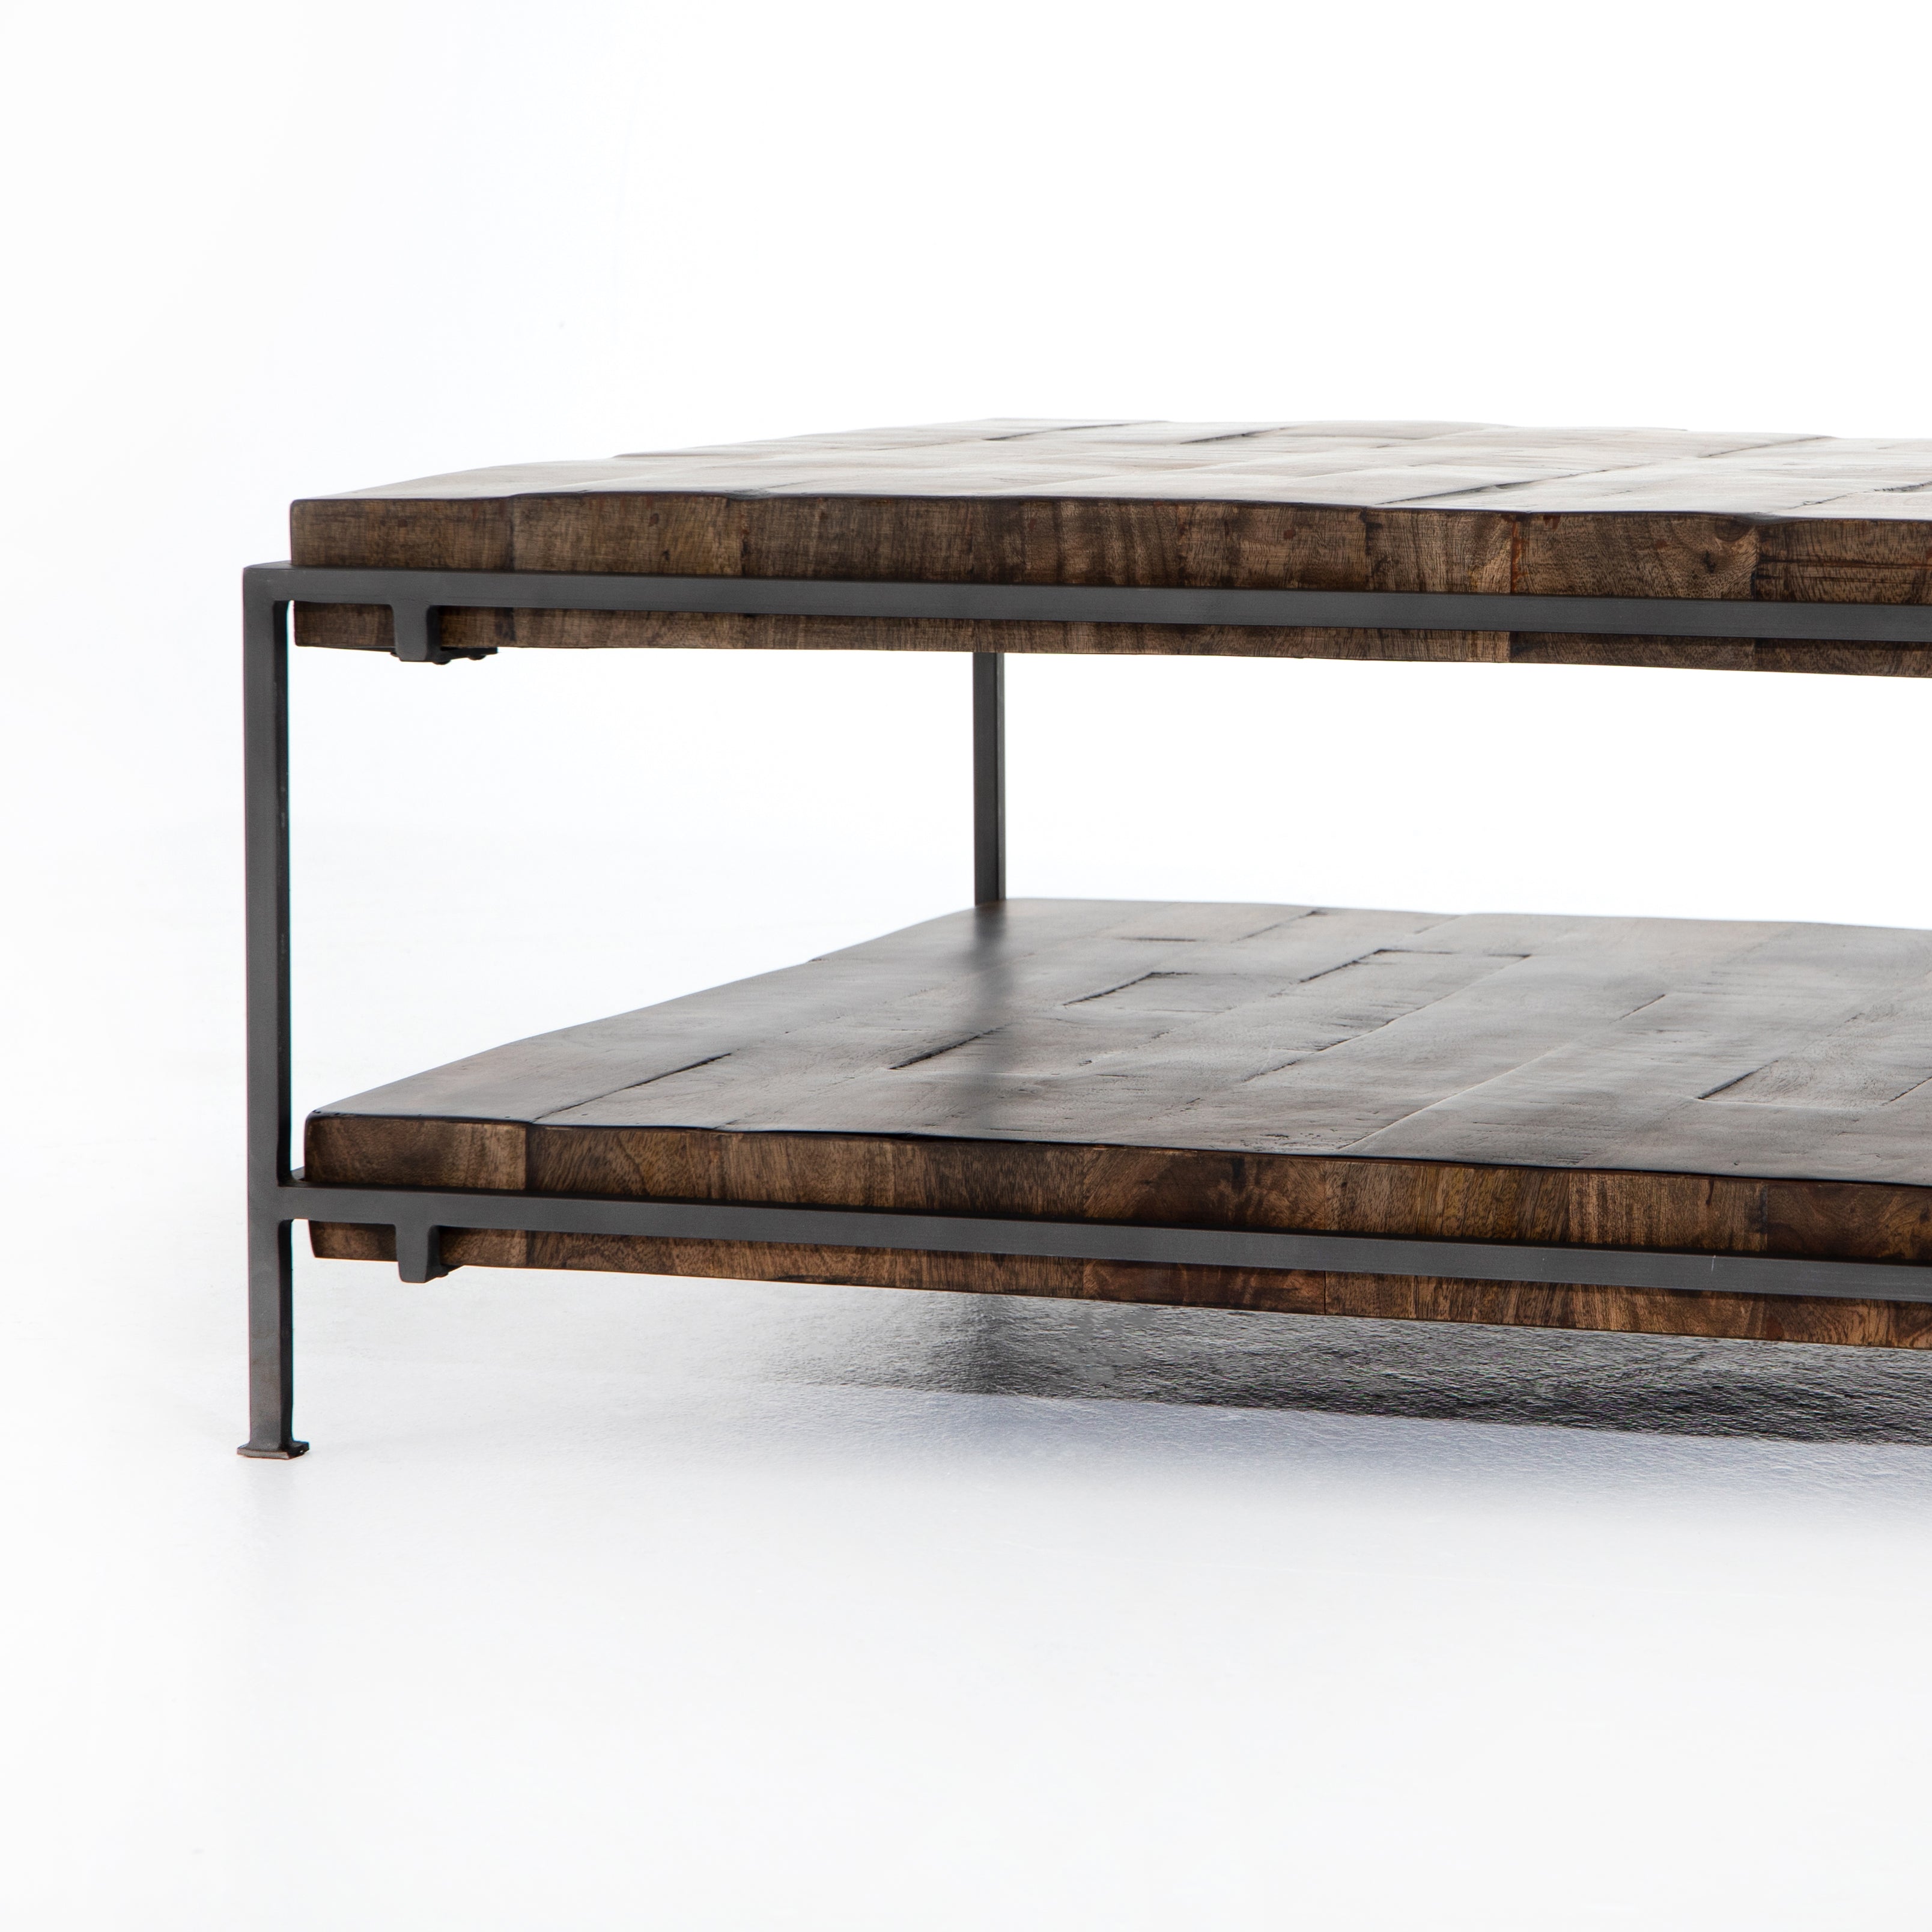 Weathered Hickory &amp; Gunmetal Iron | Simien Square Coffee Table | Valley Ridge Furniture